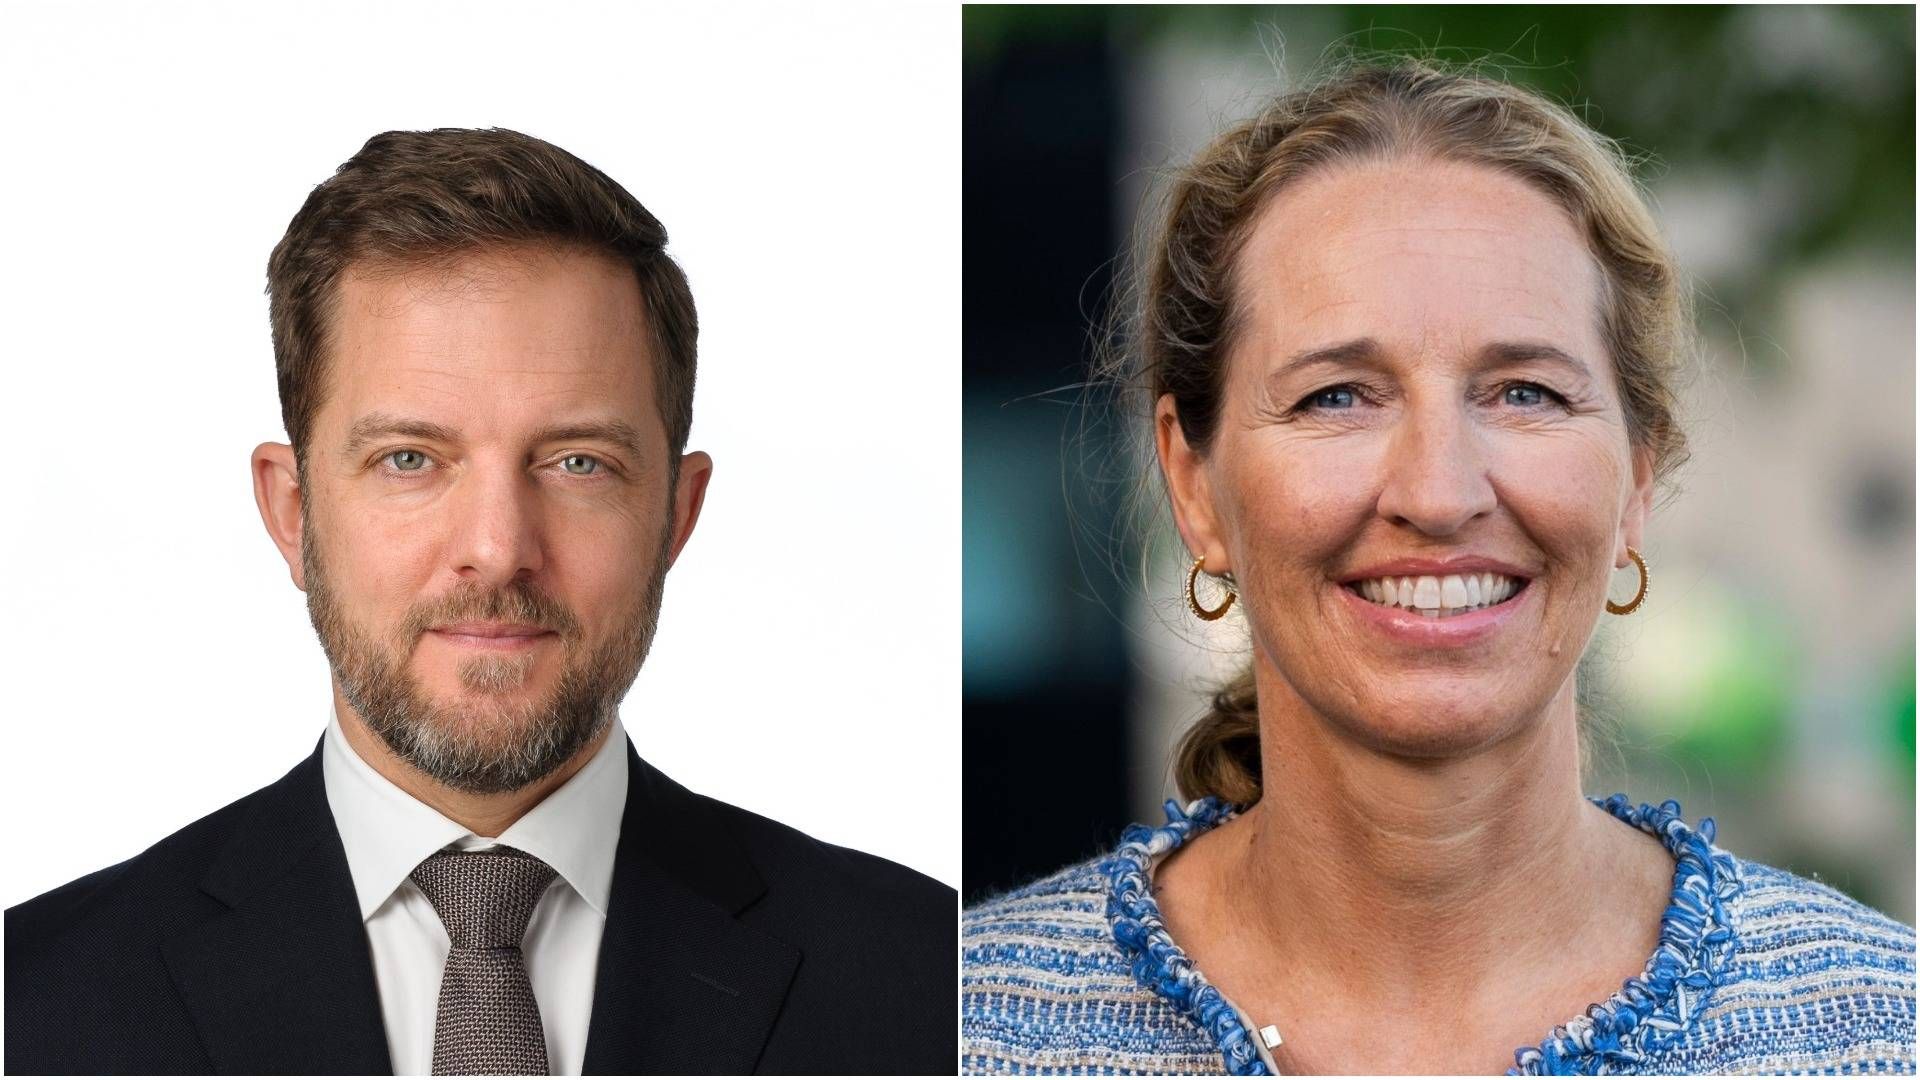 Shawn Westcott, Senior Investor Relationship Manager for the Nordic region at Triodos Investment Management and KLP Kapitalforvaltning Head of Mutual Funds Ann-Elisabeth Tunli Moe